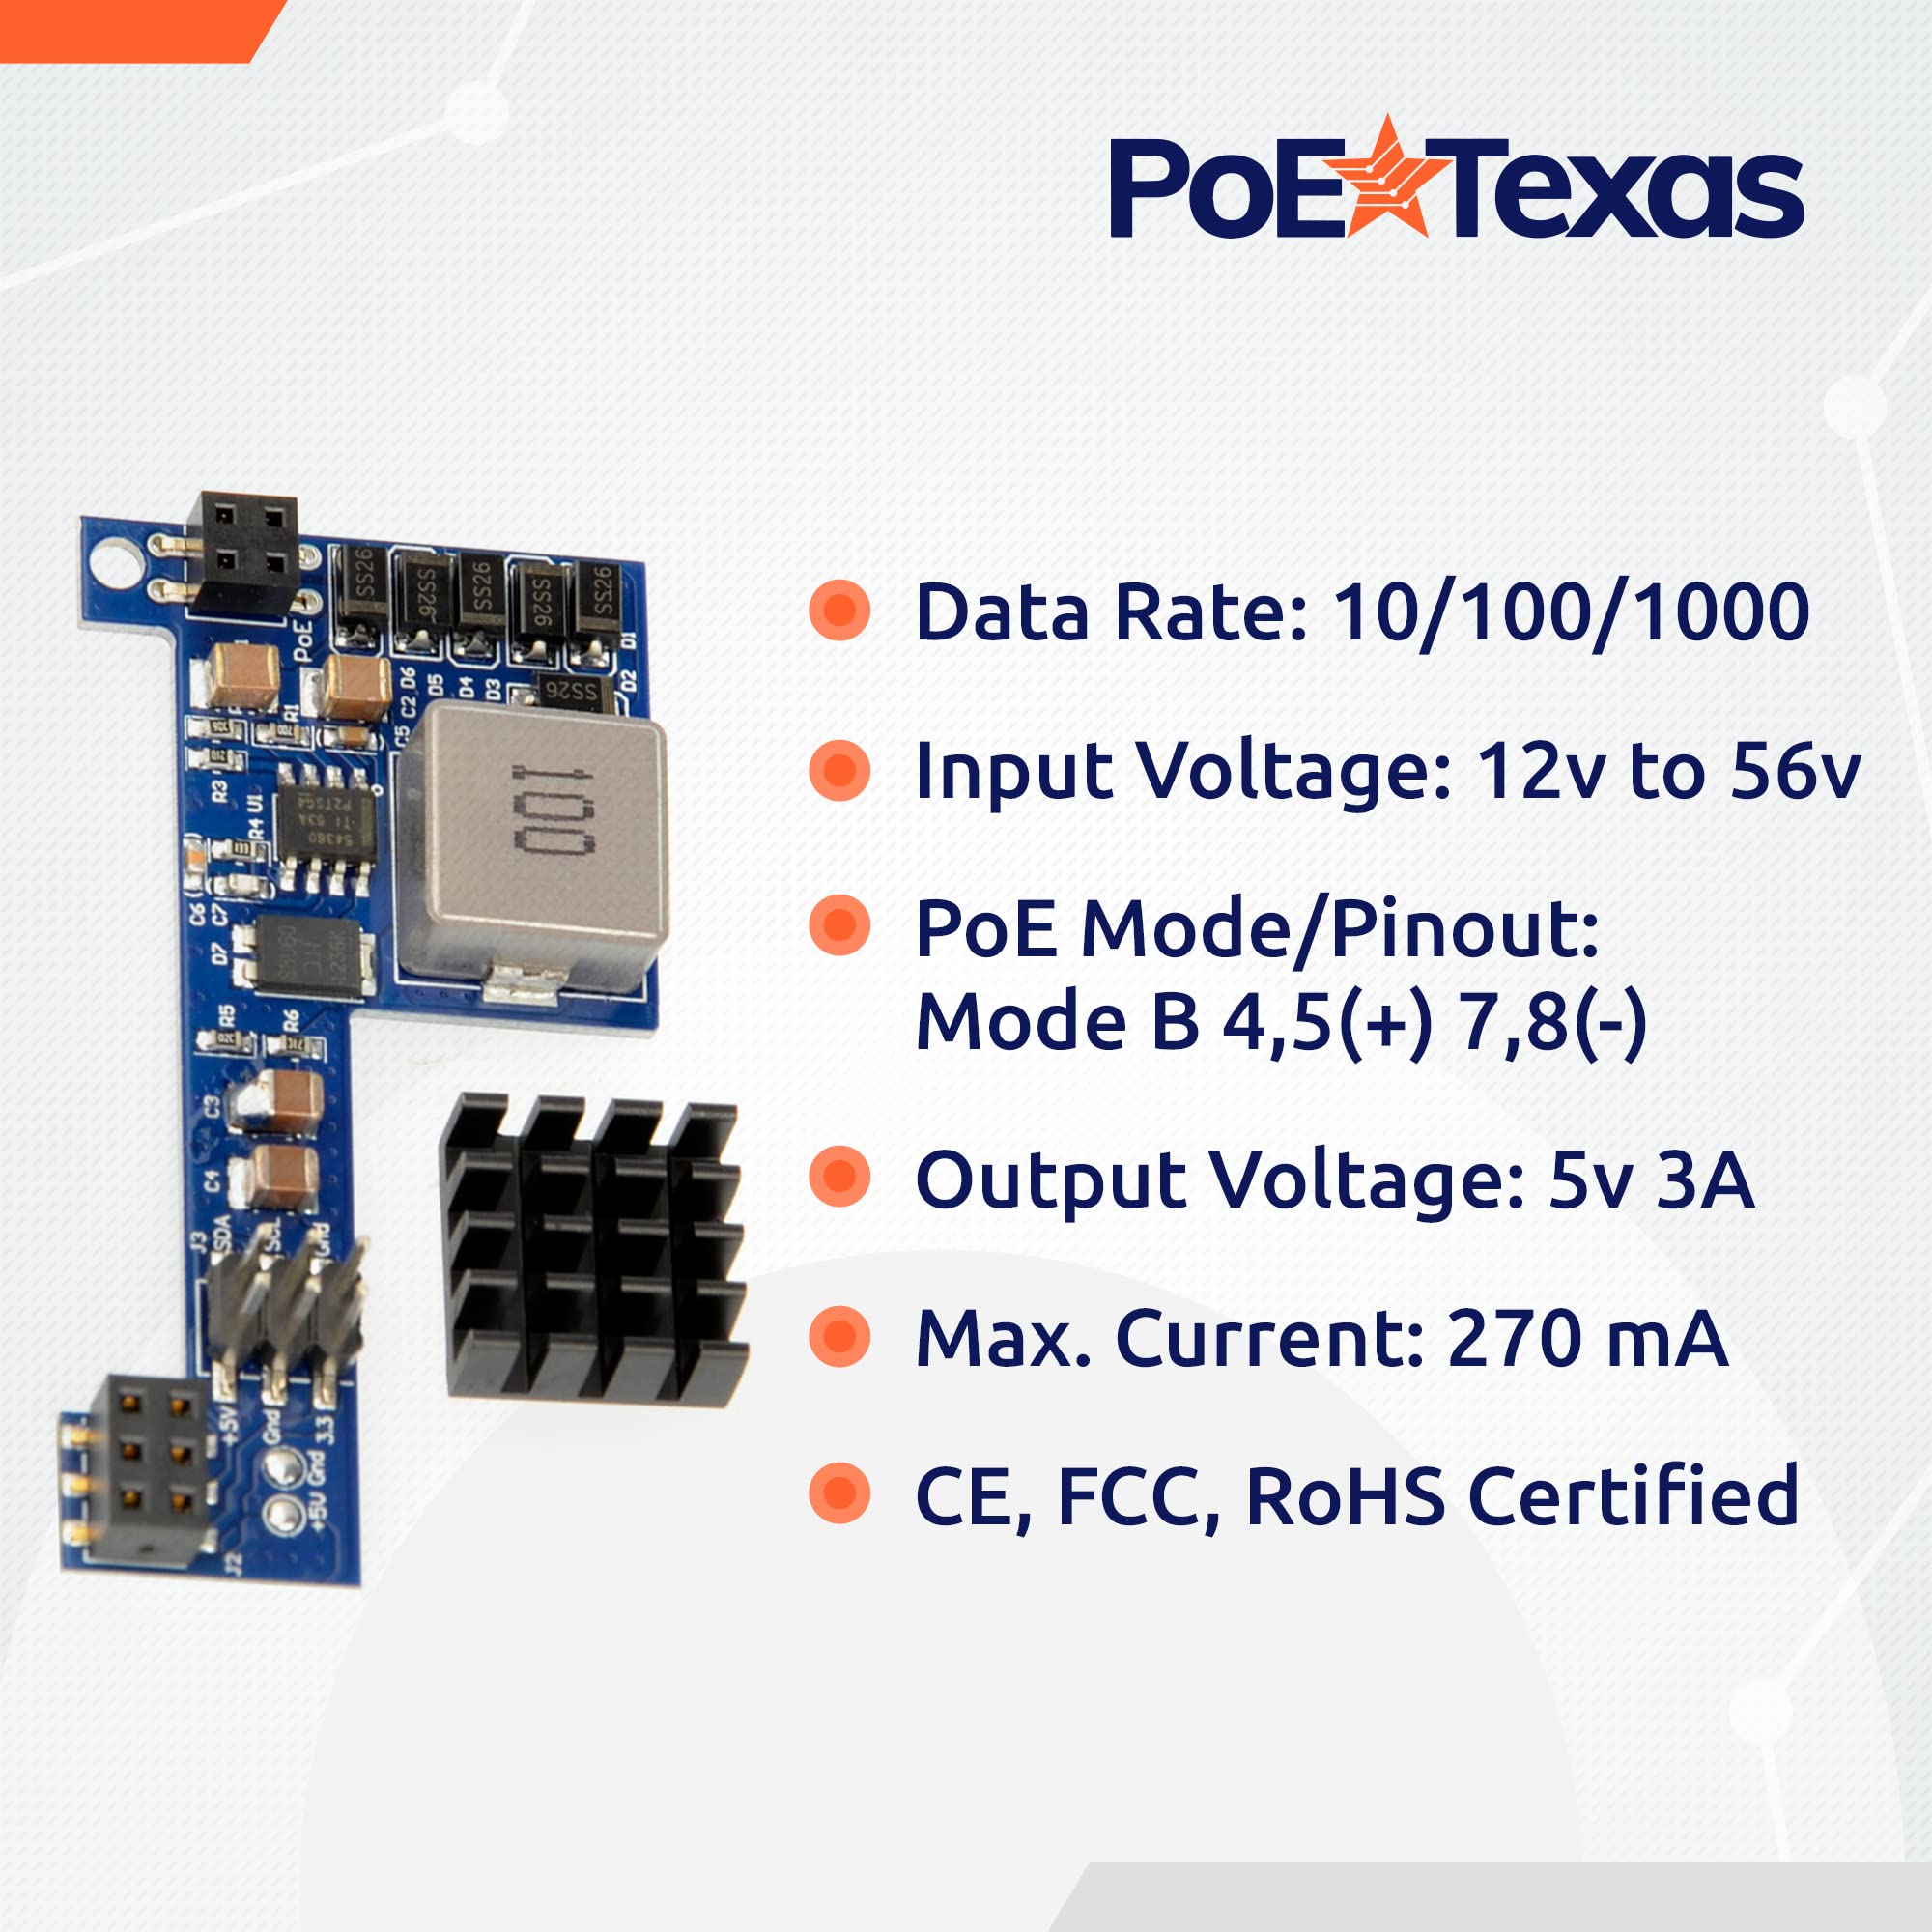 PoE Texas Raspberry Pi PoE Hat - Power Over Ethernet PiHat Fits Raspberry Pi 3 B+ and Pi 4 - Slim, Sleek, Compact, Heat Sink, Fanless - Works with 15 to 56 Volt Passive Network Switch or Injector